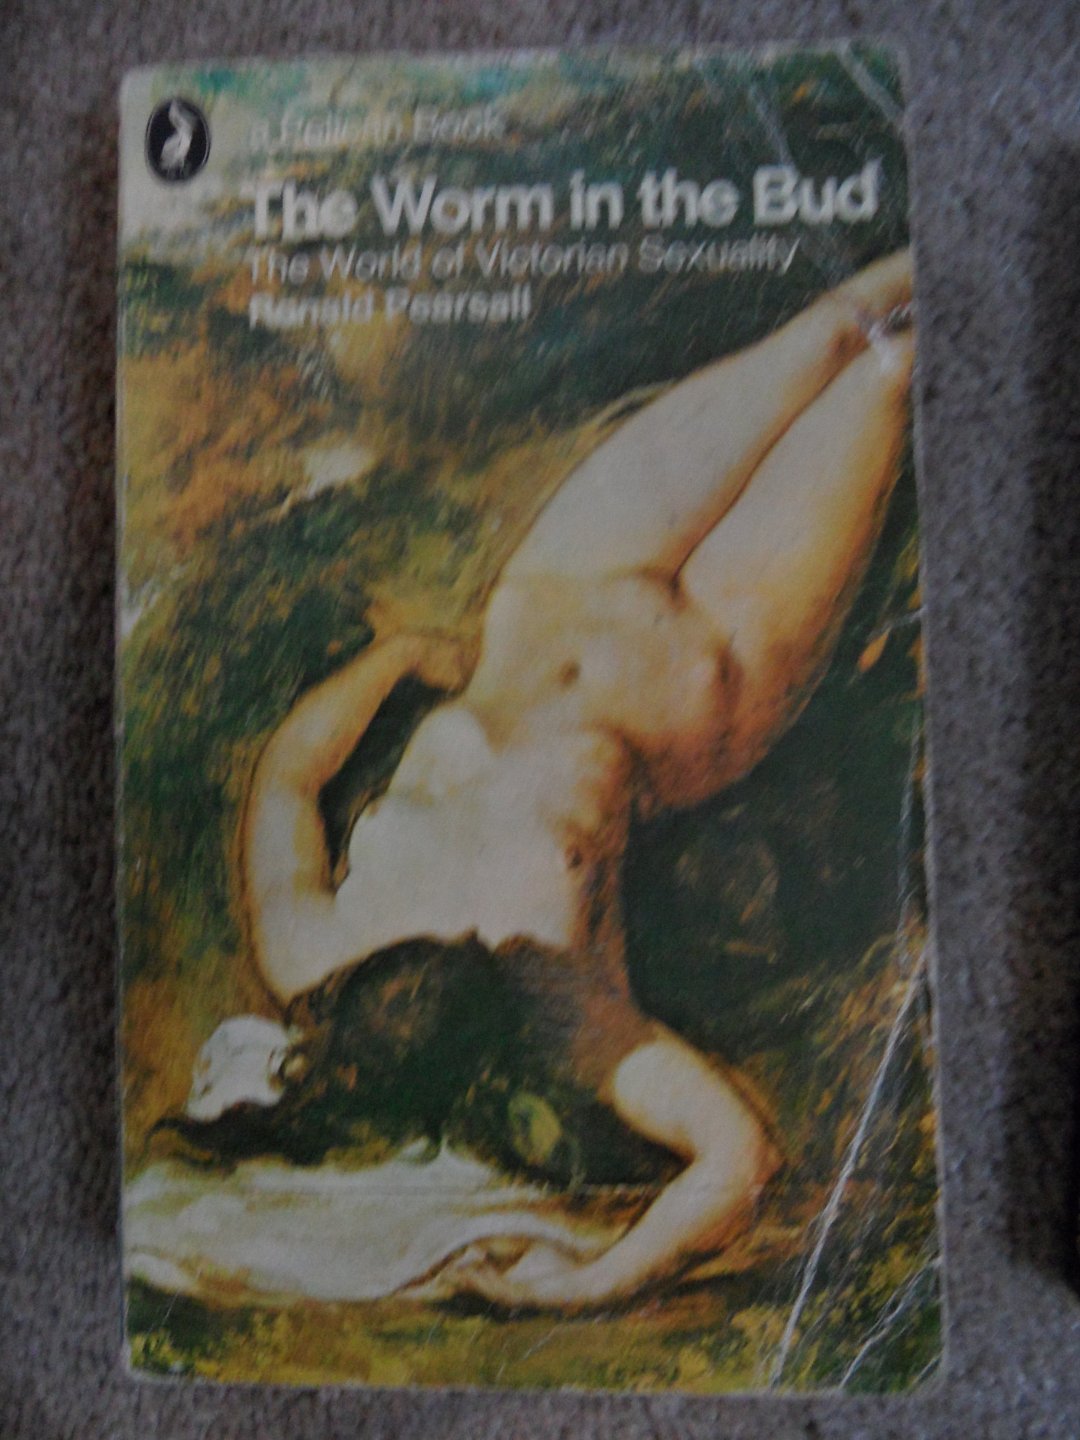 Pearsall, Ronald - The worm in the Bud. The World of Victorian Sexuality